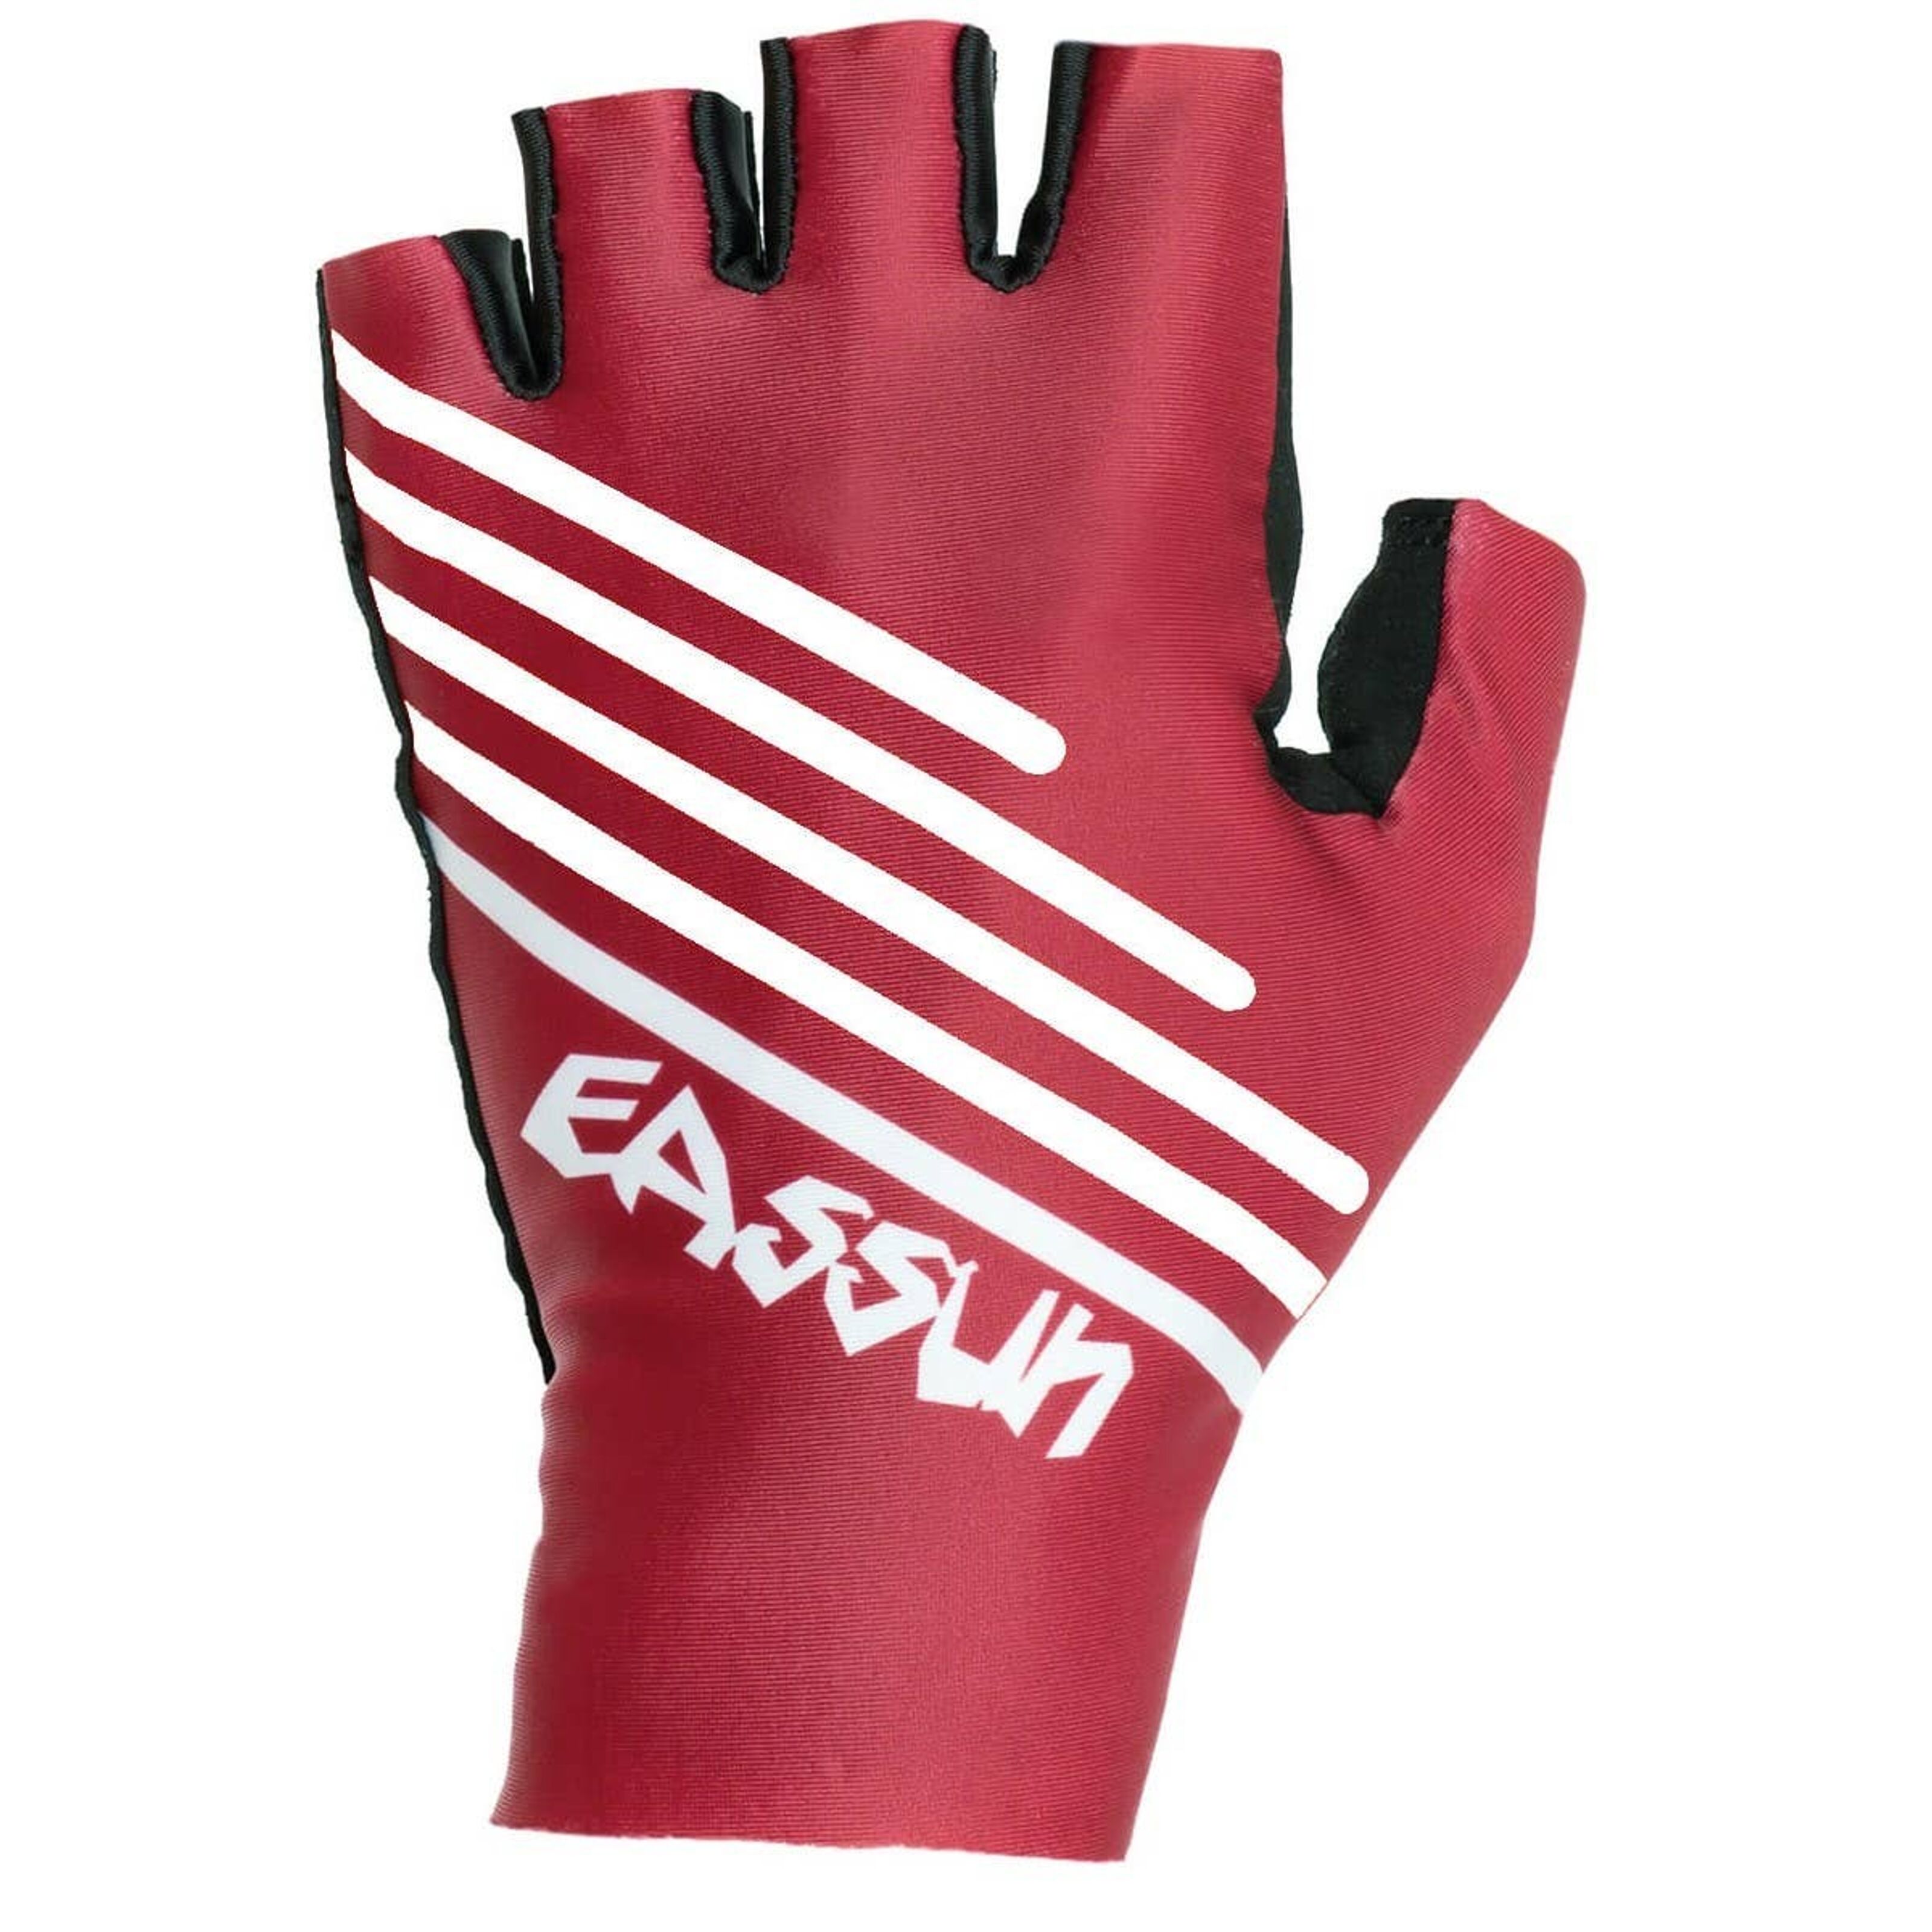 Buy sublimation gloves cycling from Wholesale Suppliers 